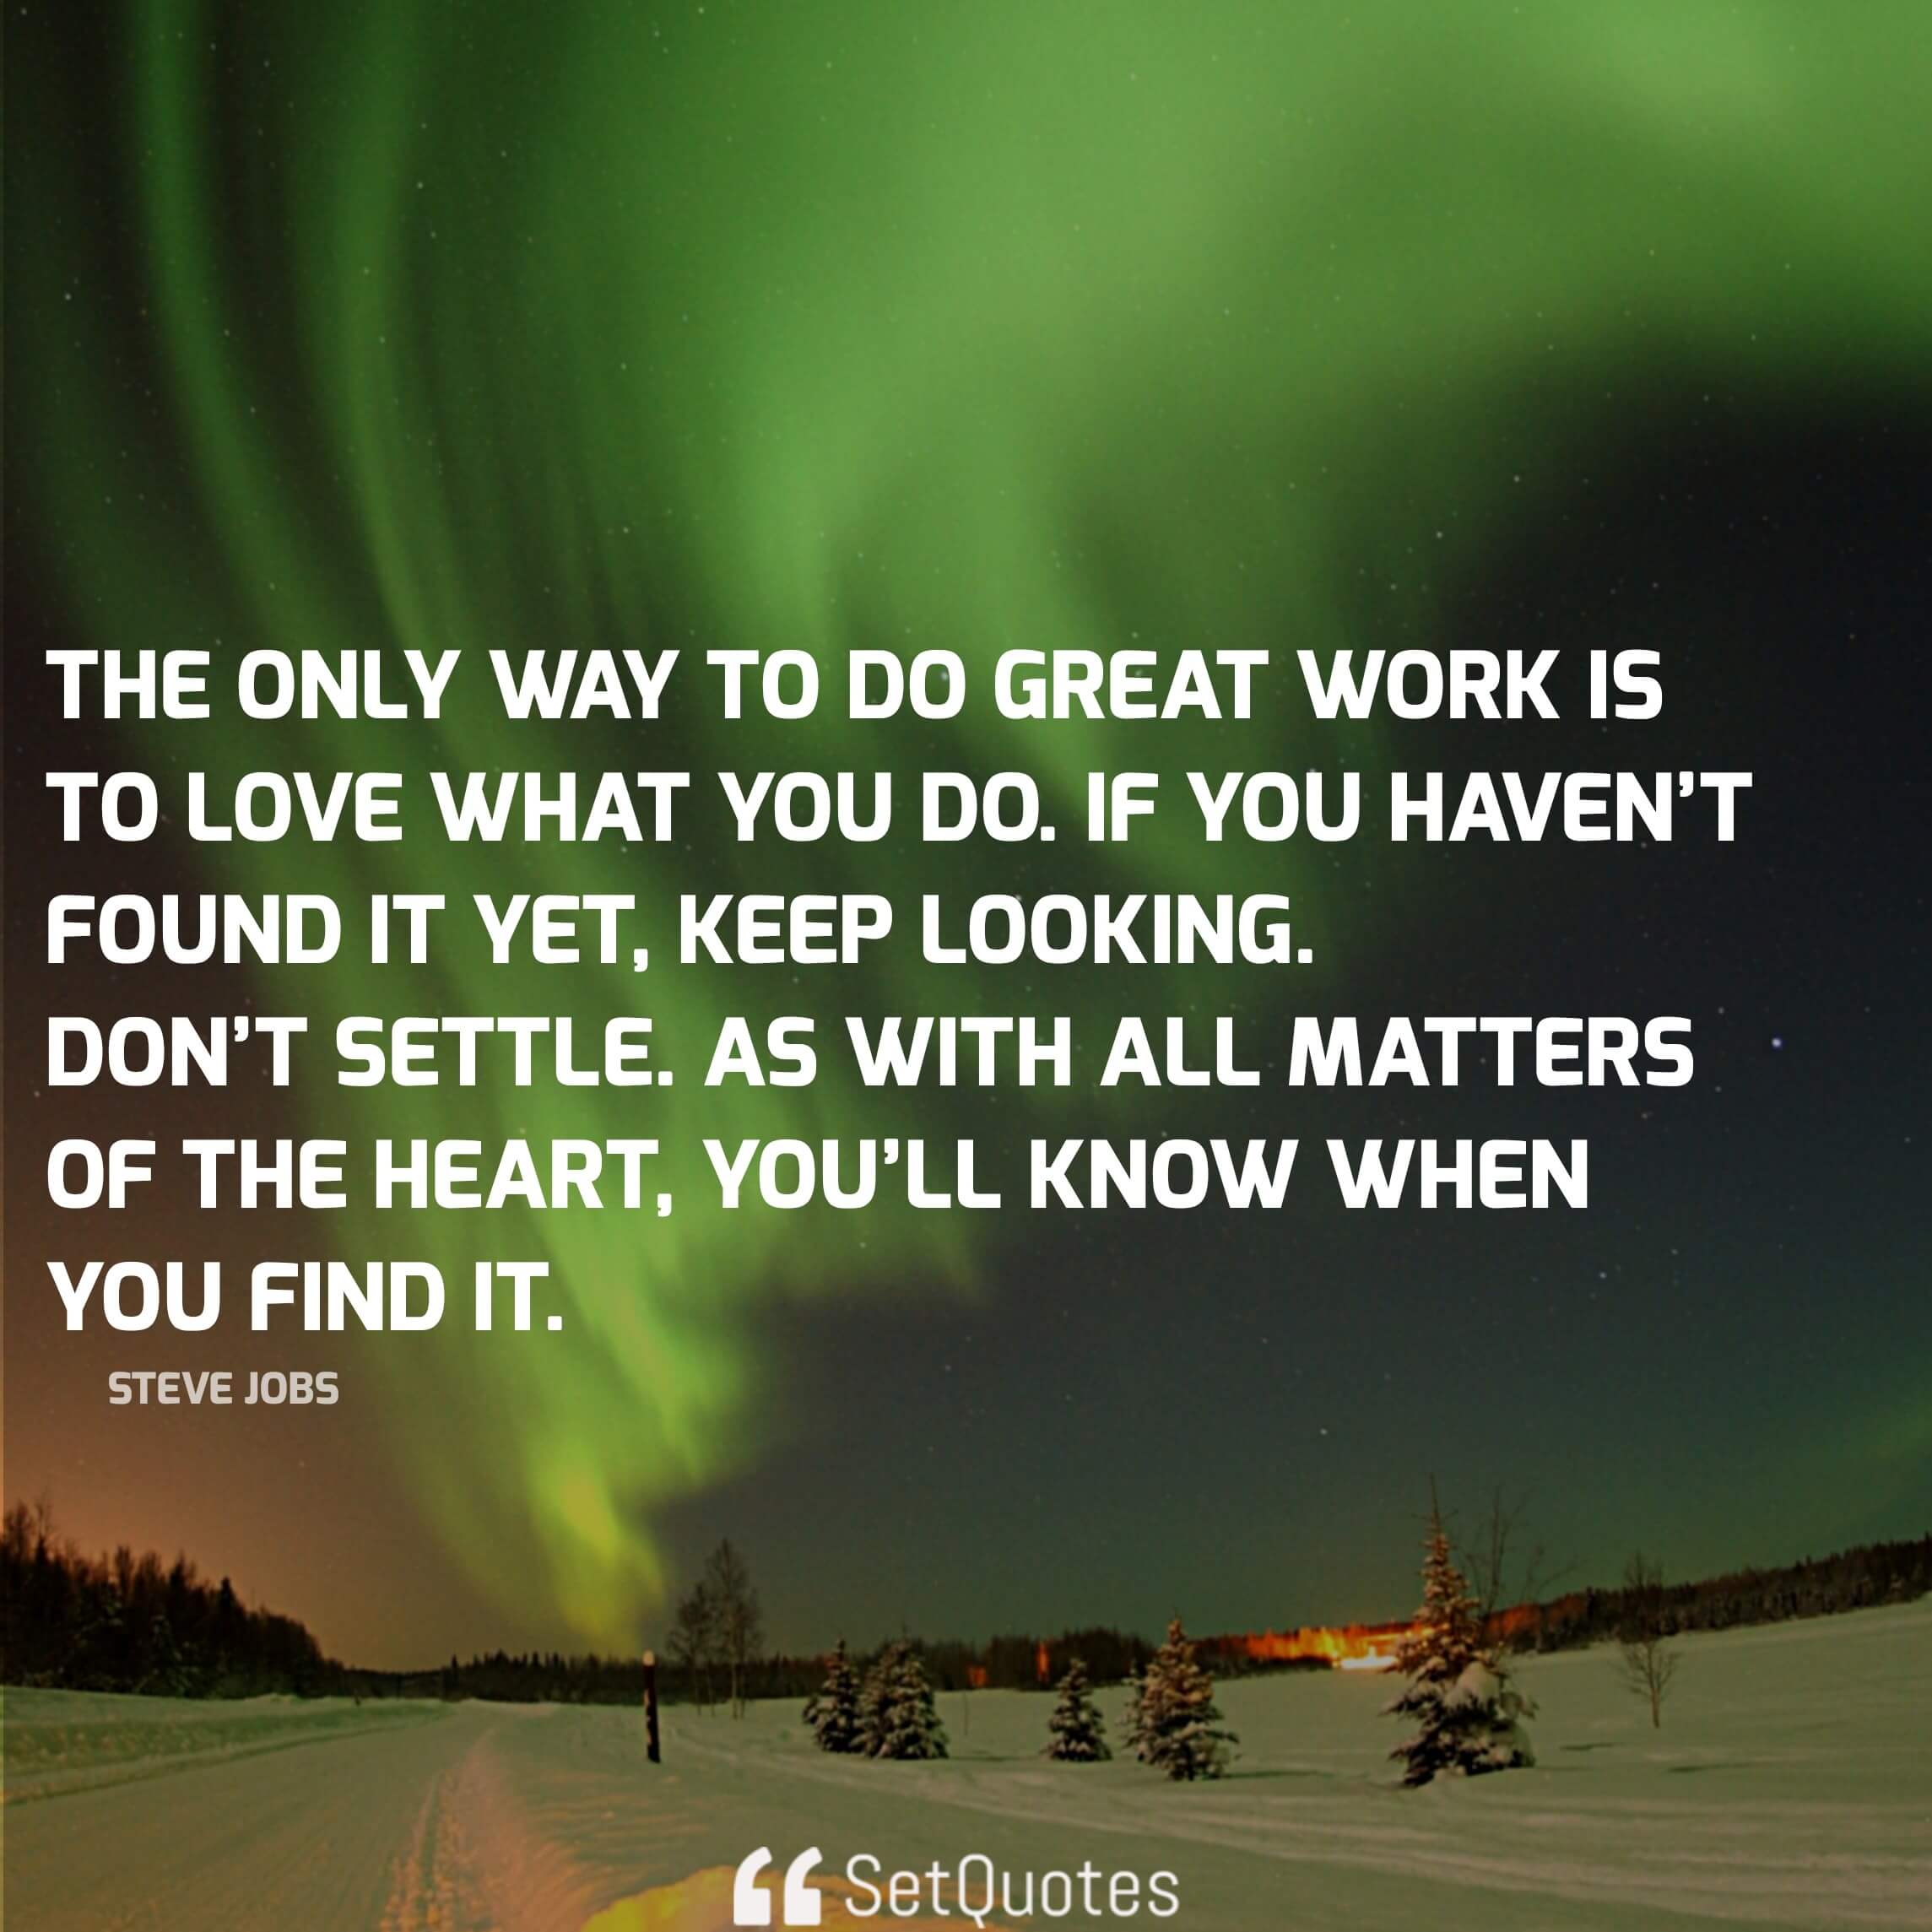 And the only way to do great work is to love what you do. If you haven’t found it yet, keep looking. Don’t settle. As with all matters of the heart, you’ll know when you find it. - steve jobs quotes